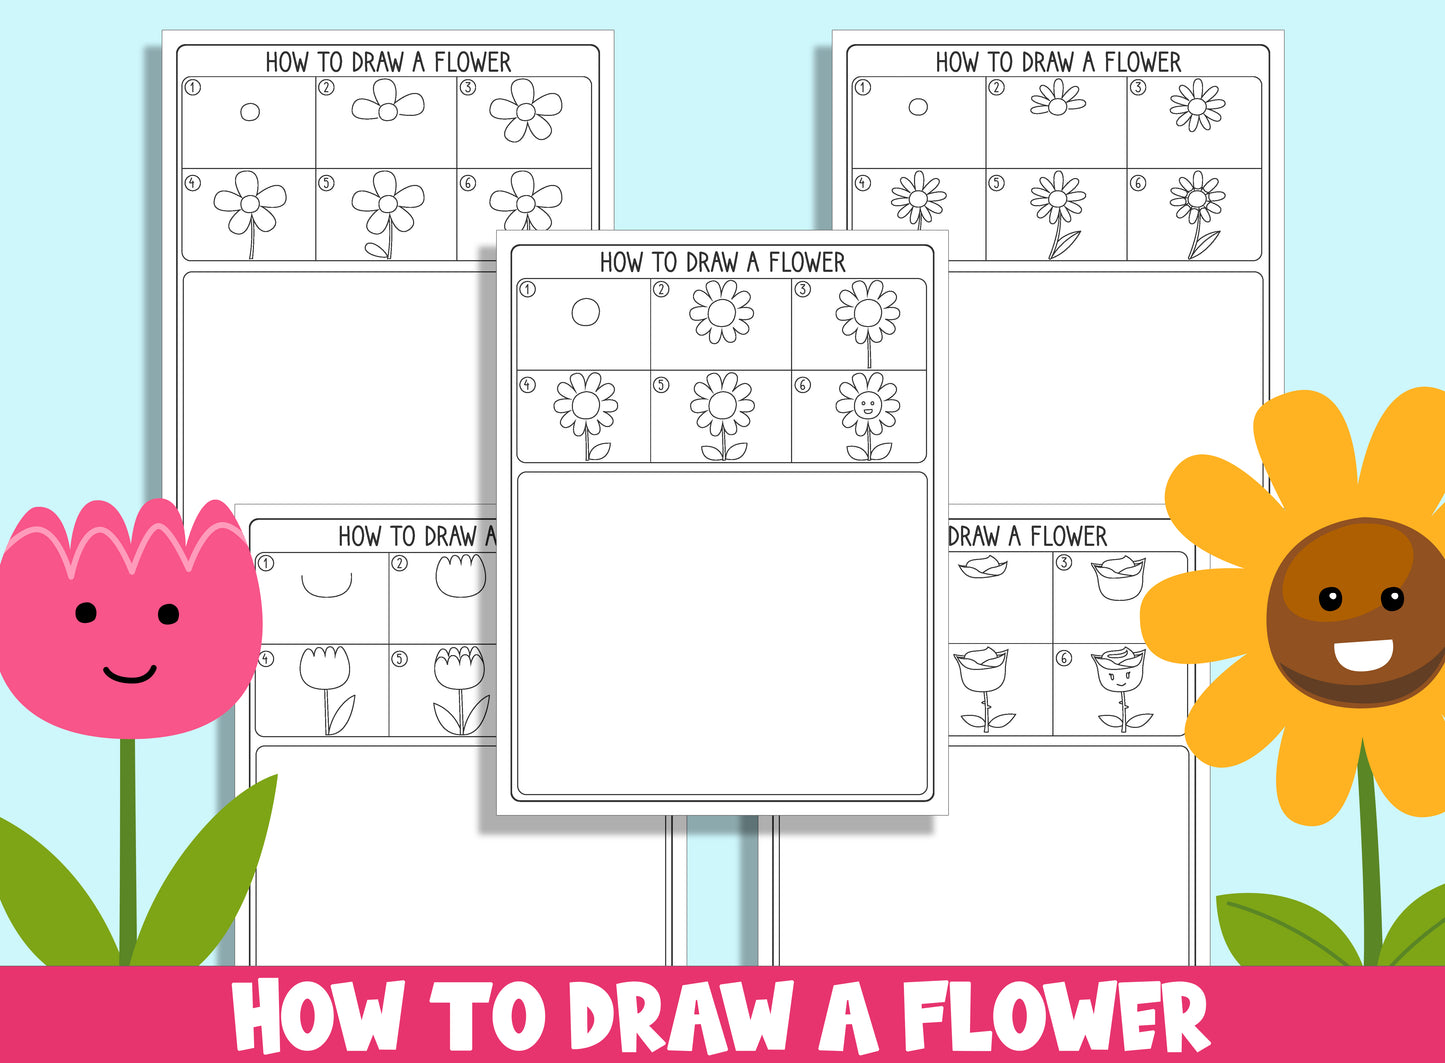 Learn How to Draw a Flower, Directed Drawing Step by Step Tutorial, Includes 5 Coloring Pages, PDF File, Instant Download